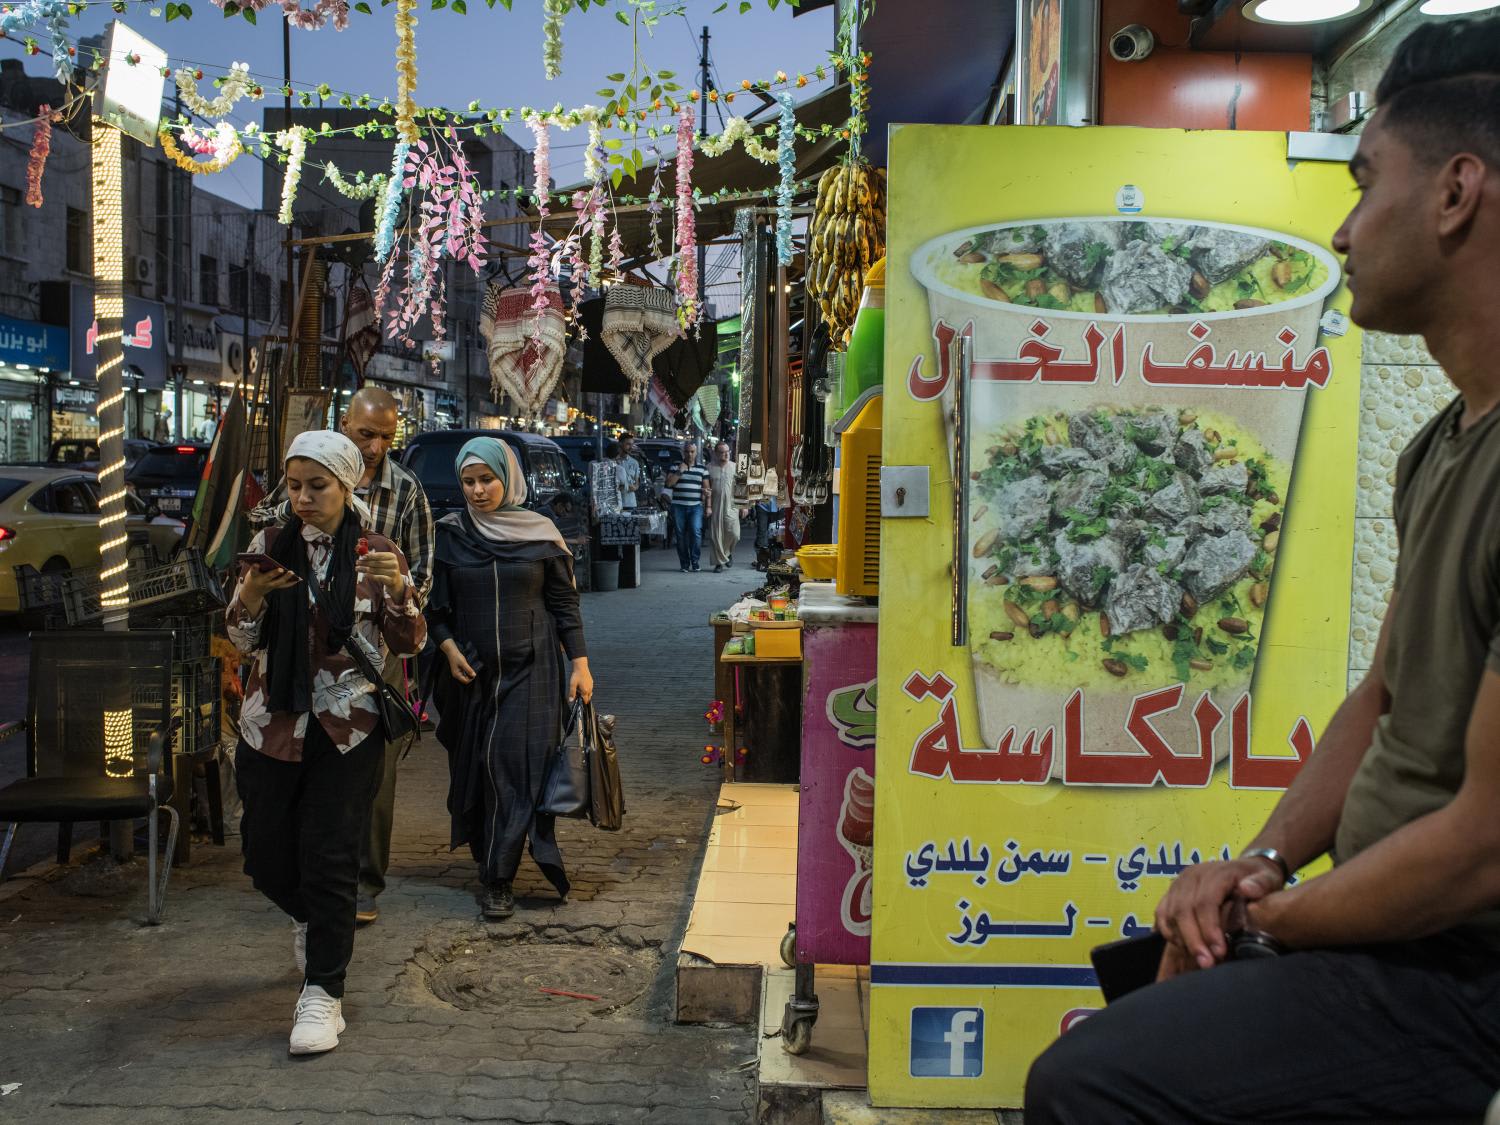 <p>A shop offers to-go cups of mansaf, a mutton and rice dish, in downtown Amman, Jordan on June 2, 2022. A restaurateur’s takeout offering of mansaf in a cup provides a novel way to enjoy Jordan’s most treasured delicacy, but some see the culinary innovation as an affront to the country’s most hallowed traditions.&nbsp;</p>
